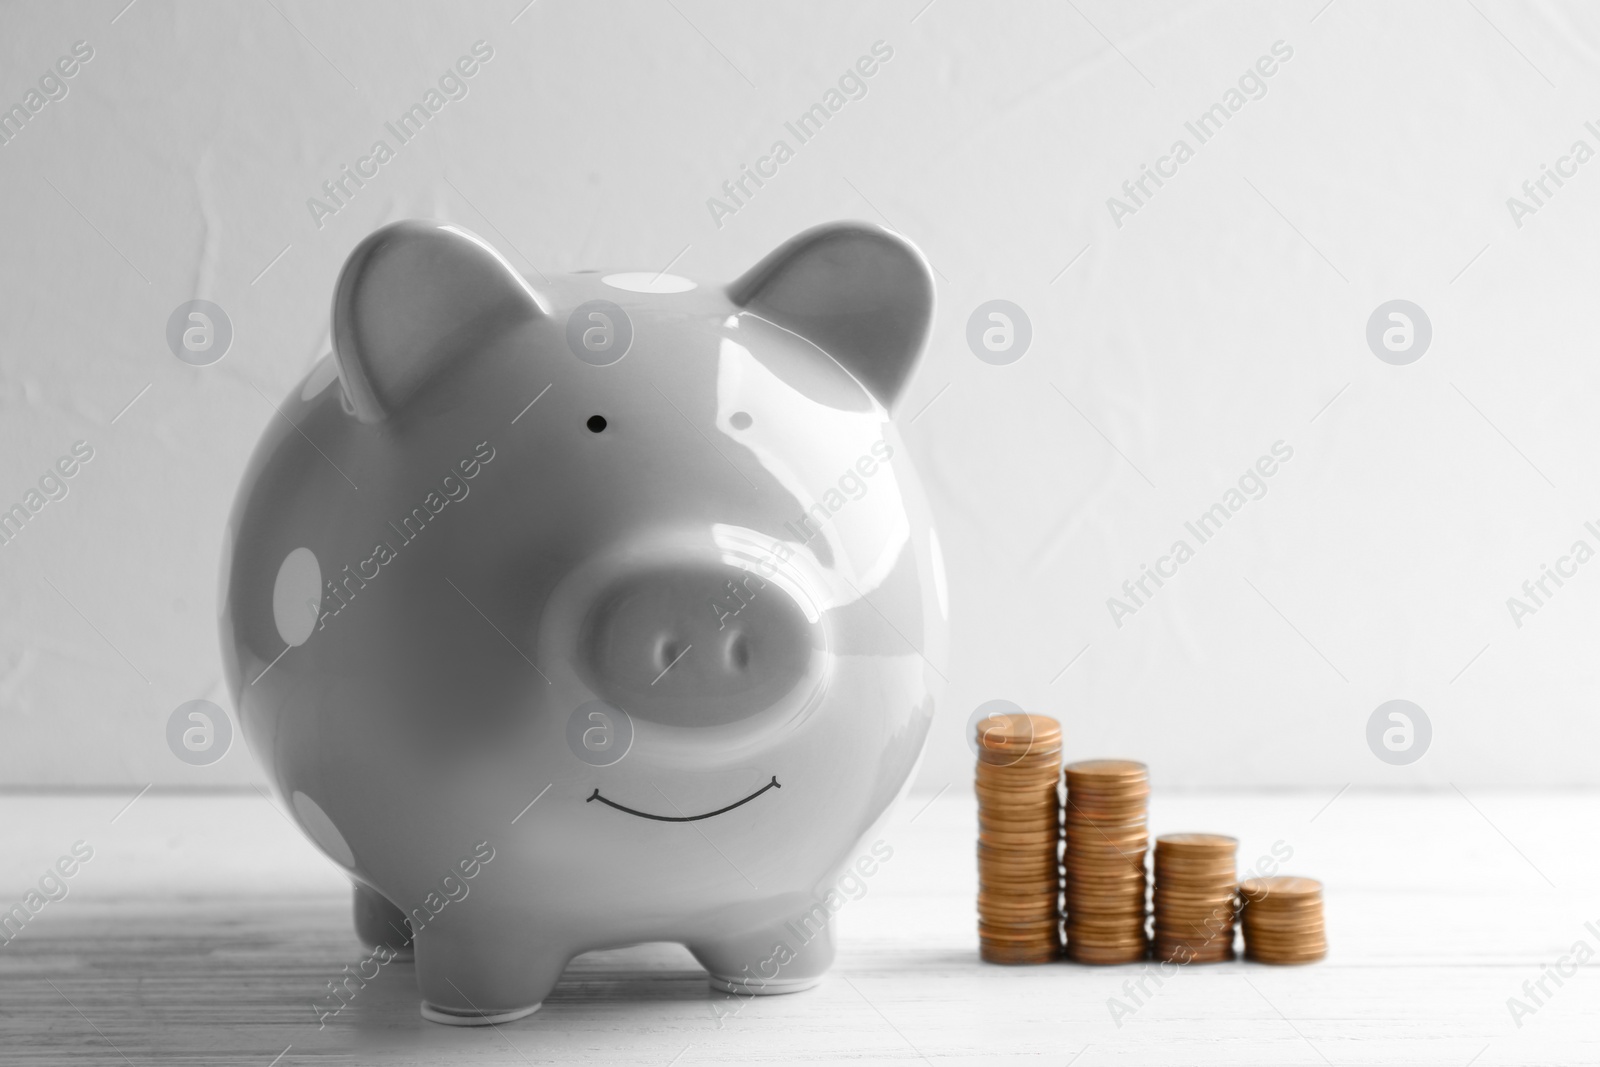 Photo of Piggy bank and coins on table against light background